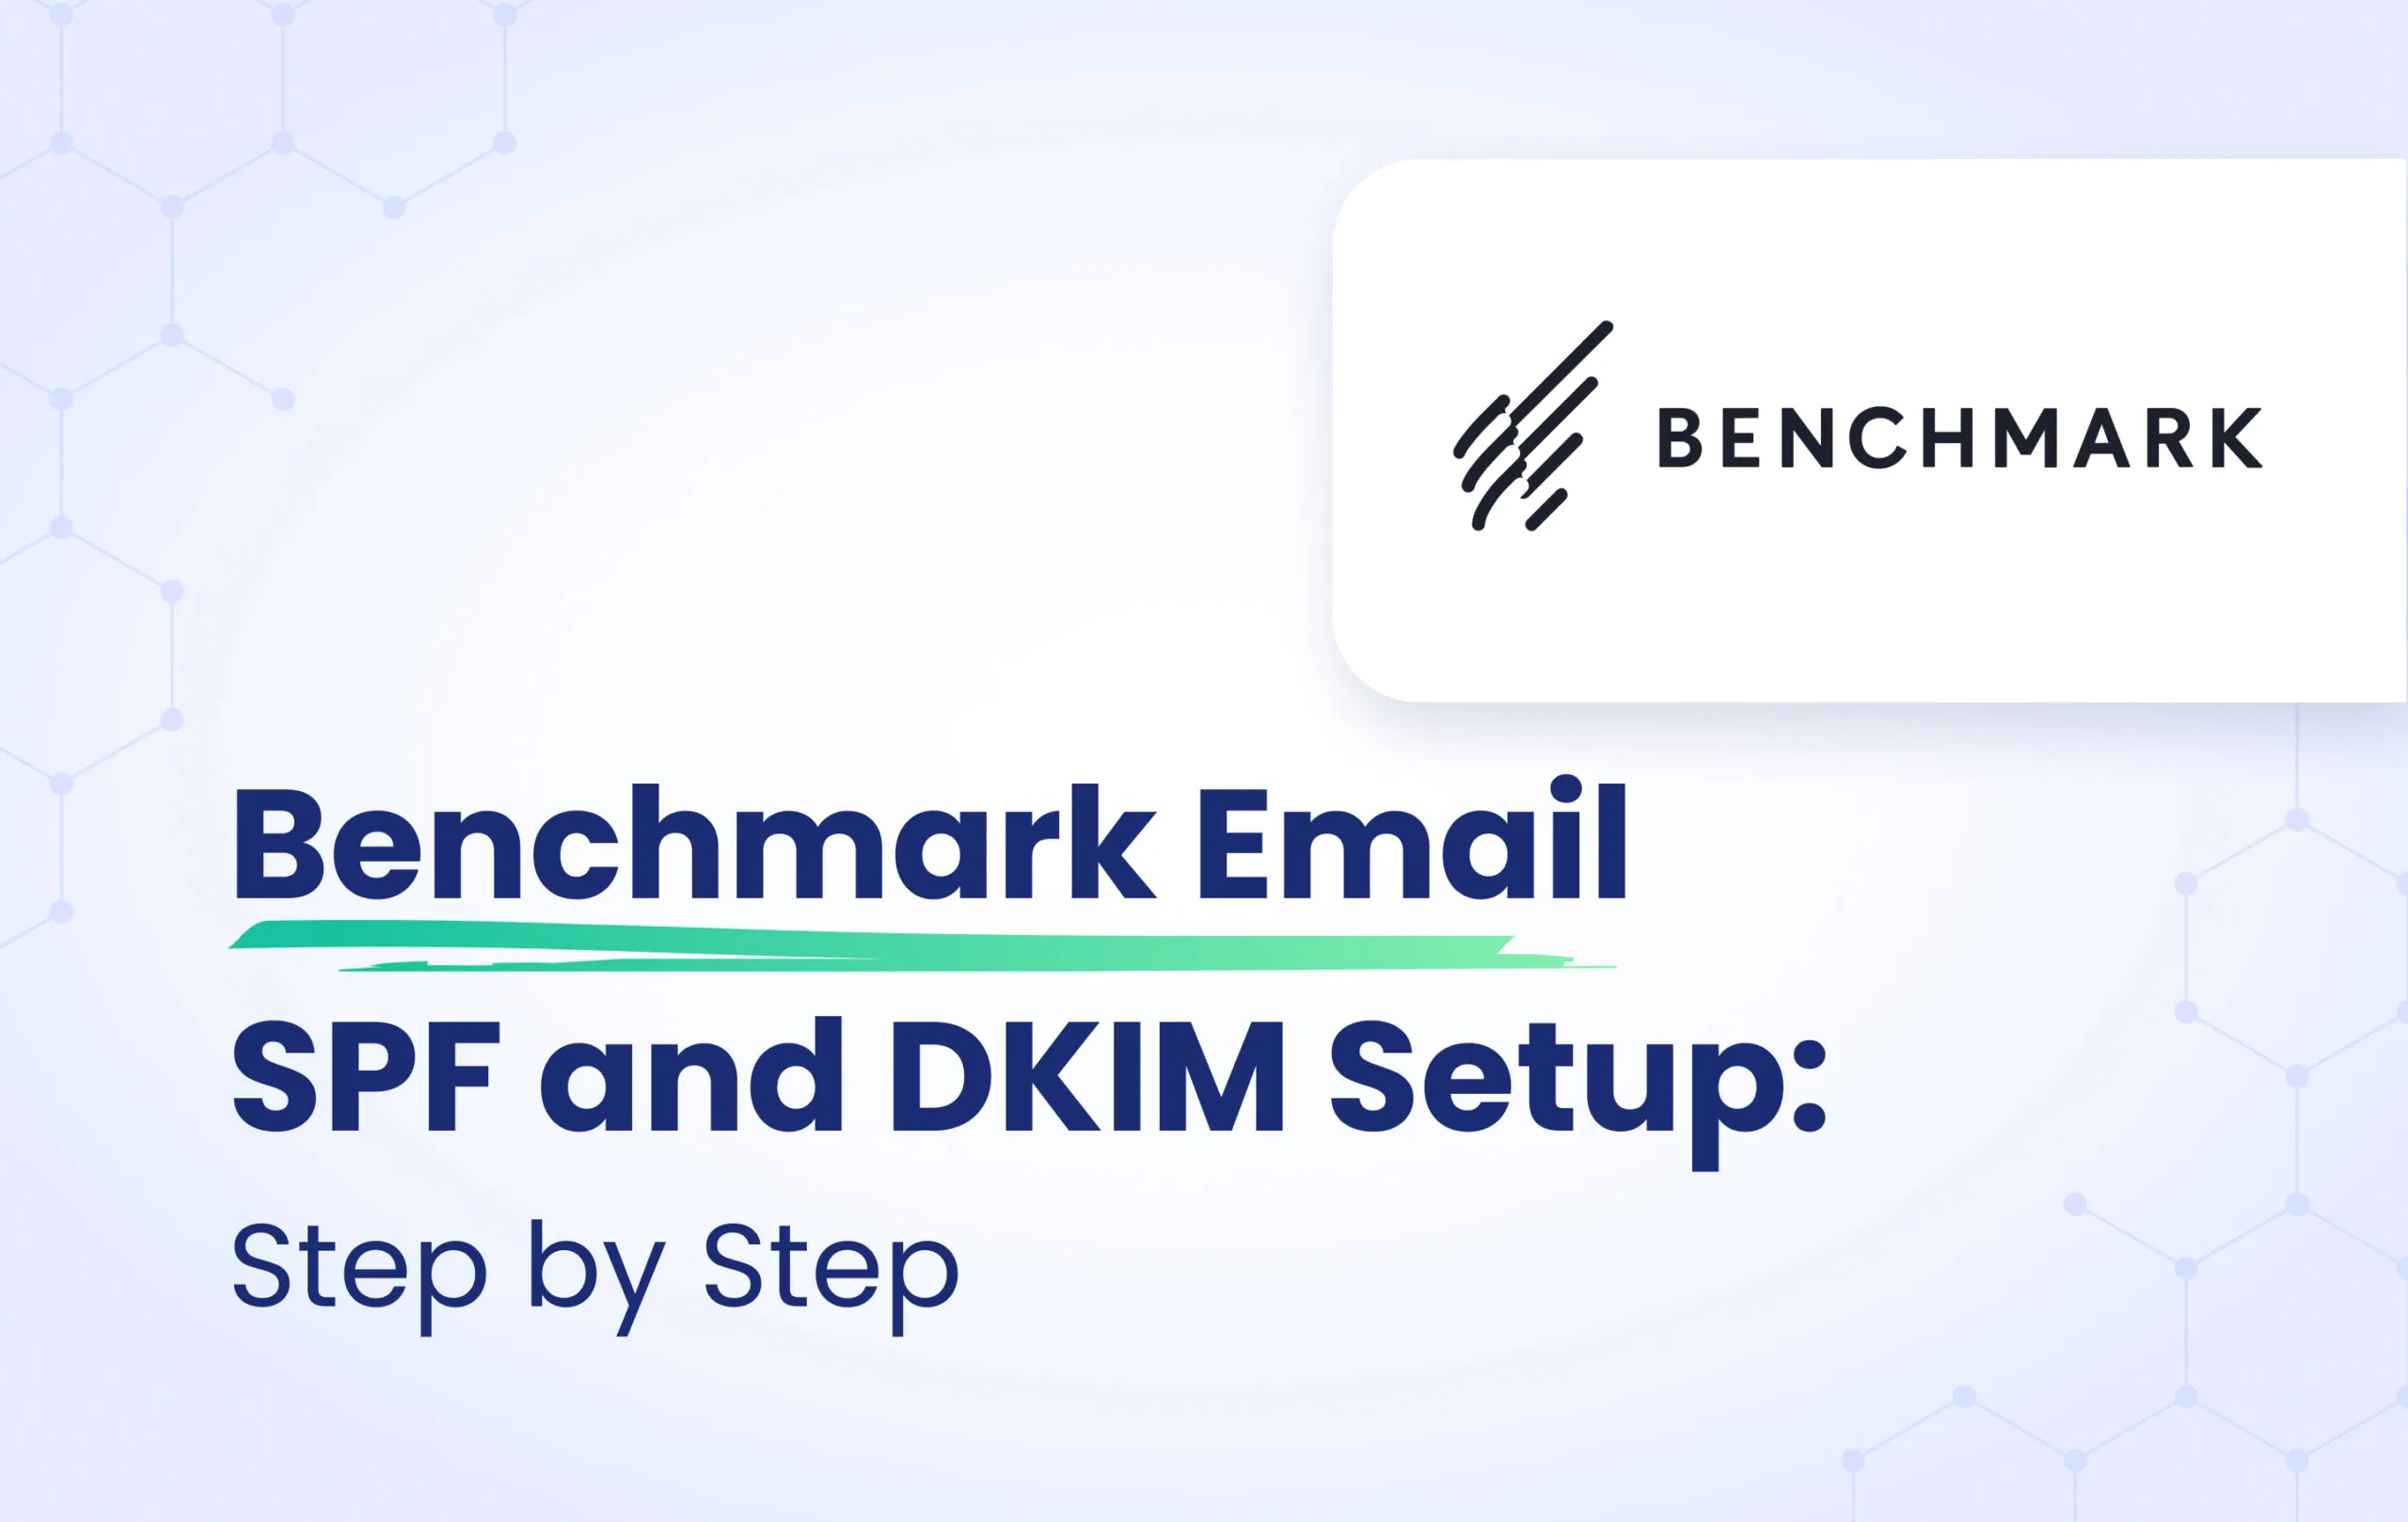 Benchmark SPF and DKIM configuration